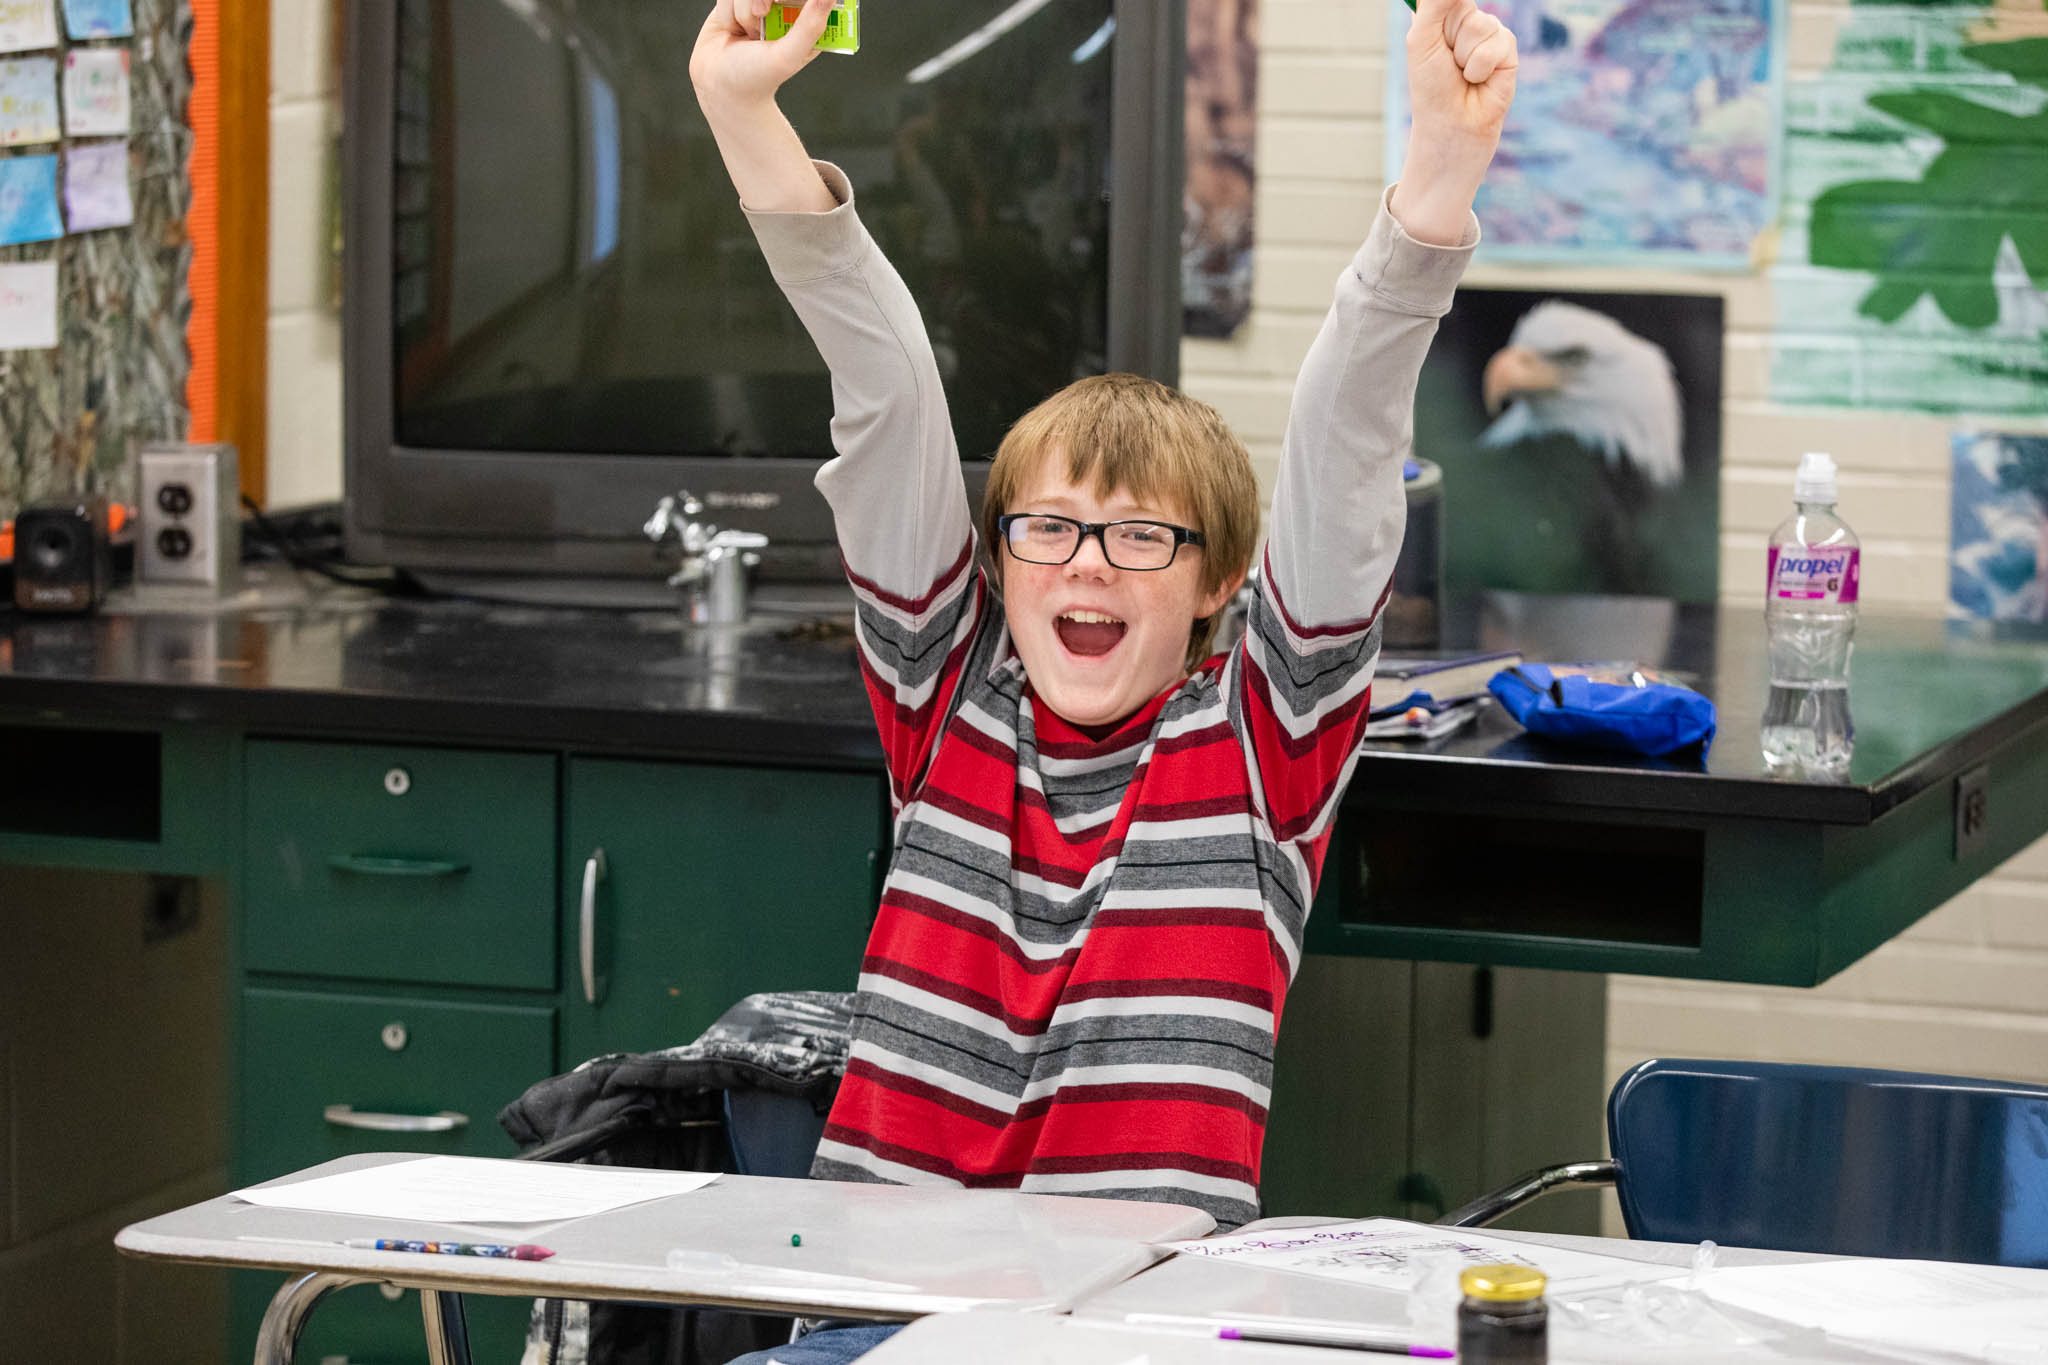 A young man throws his arms up in the air in celebration, in a classroom.